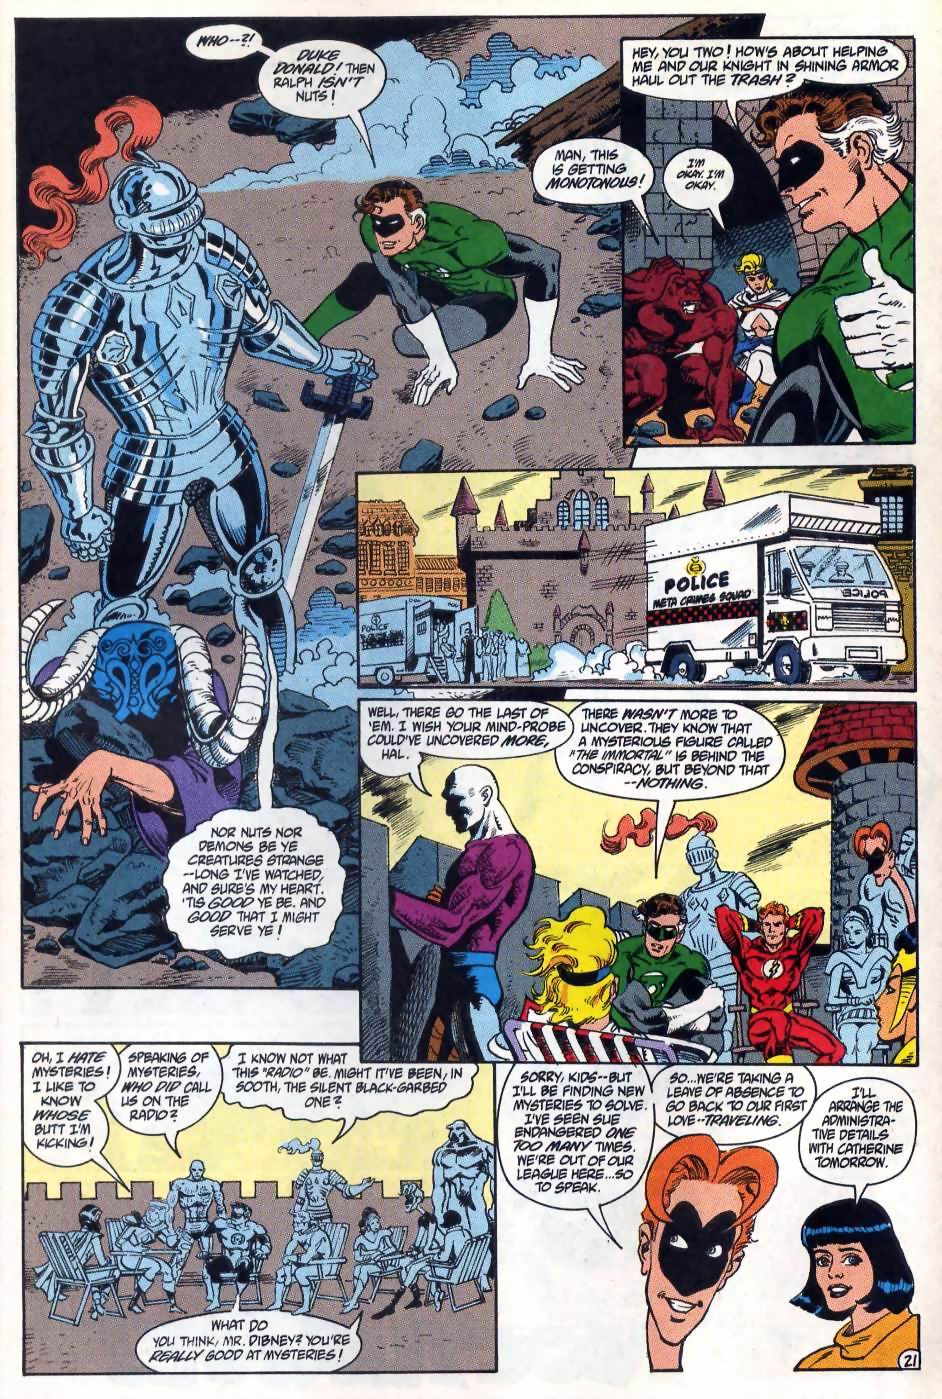 Justice League International (1993) 57 Page 21